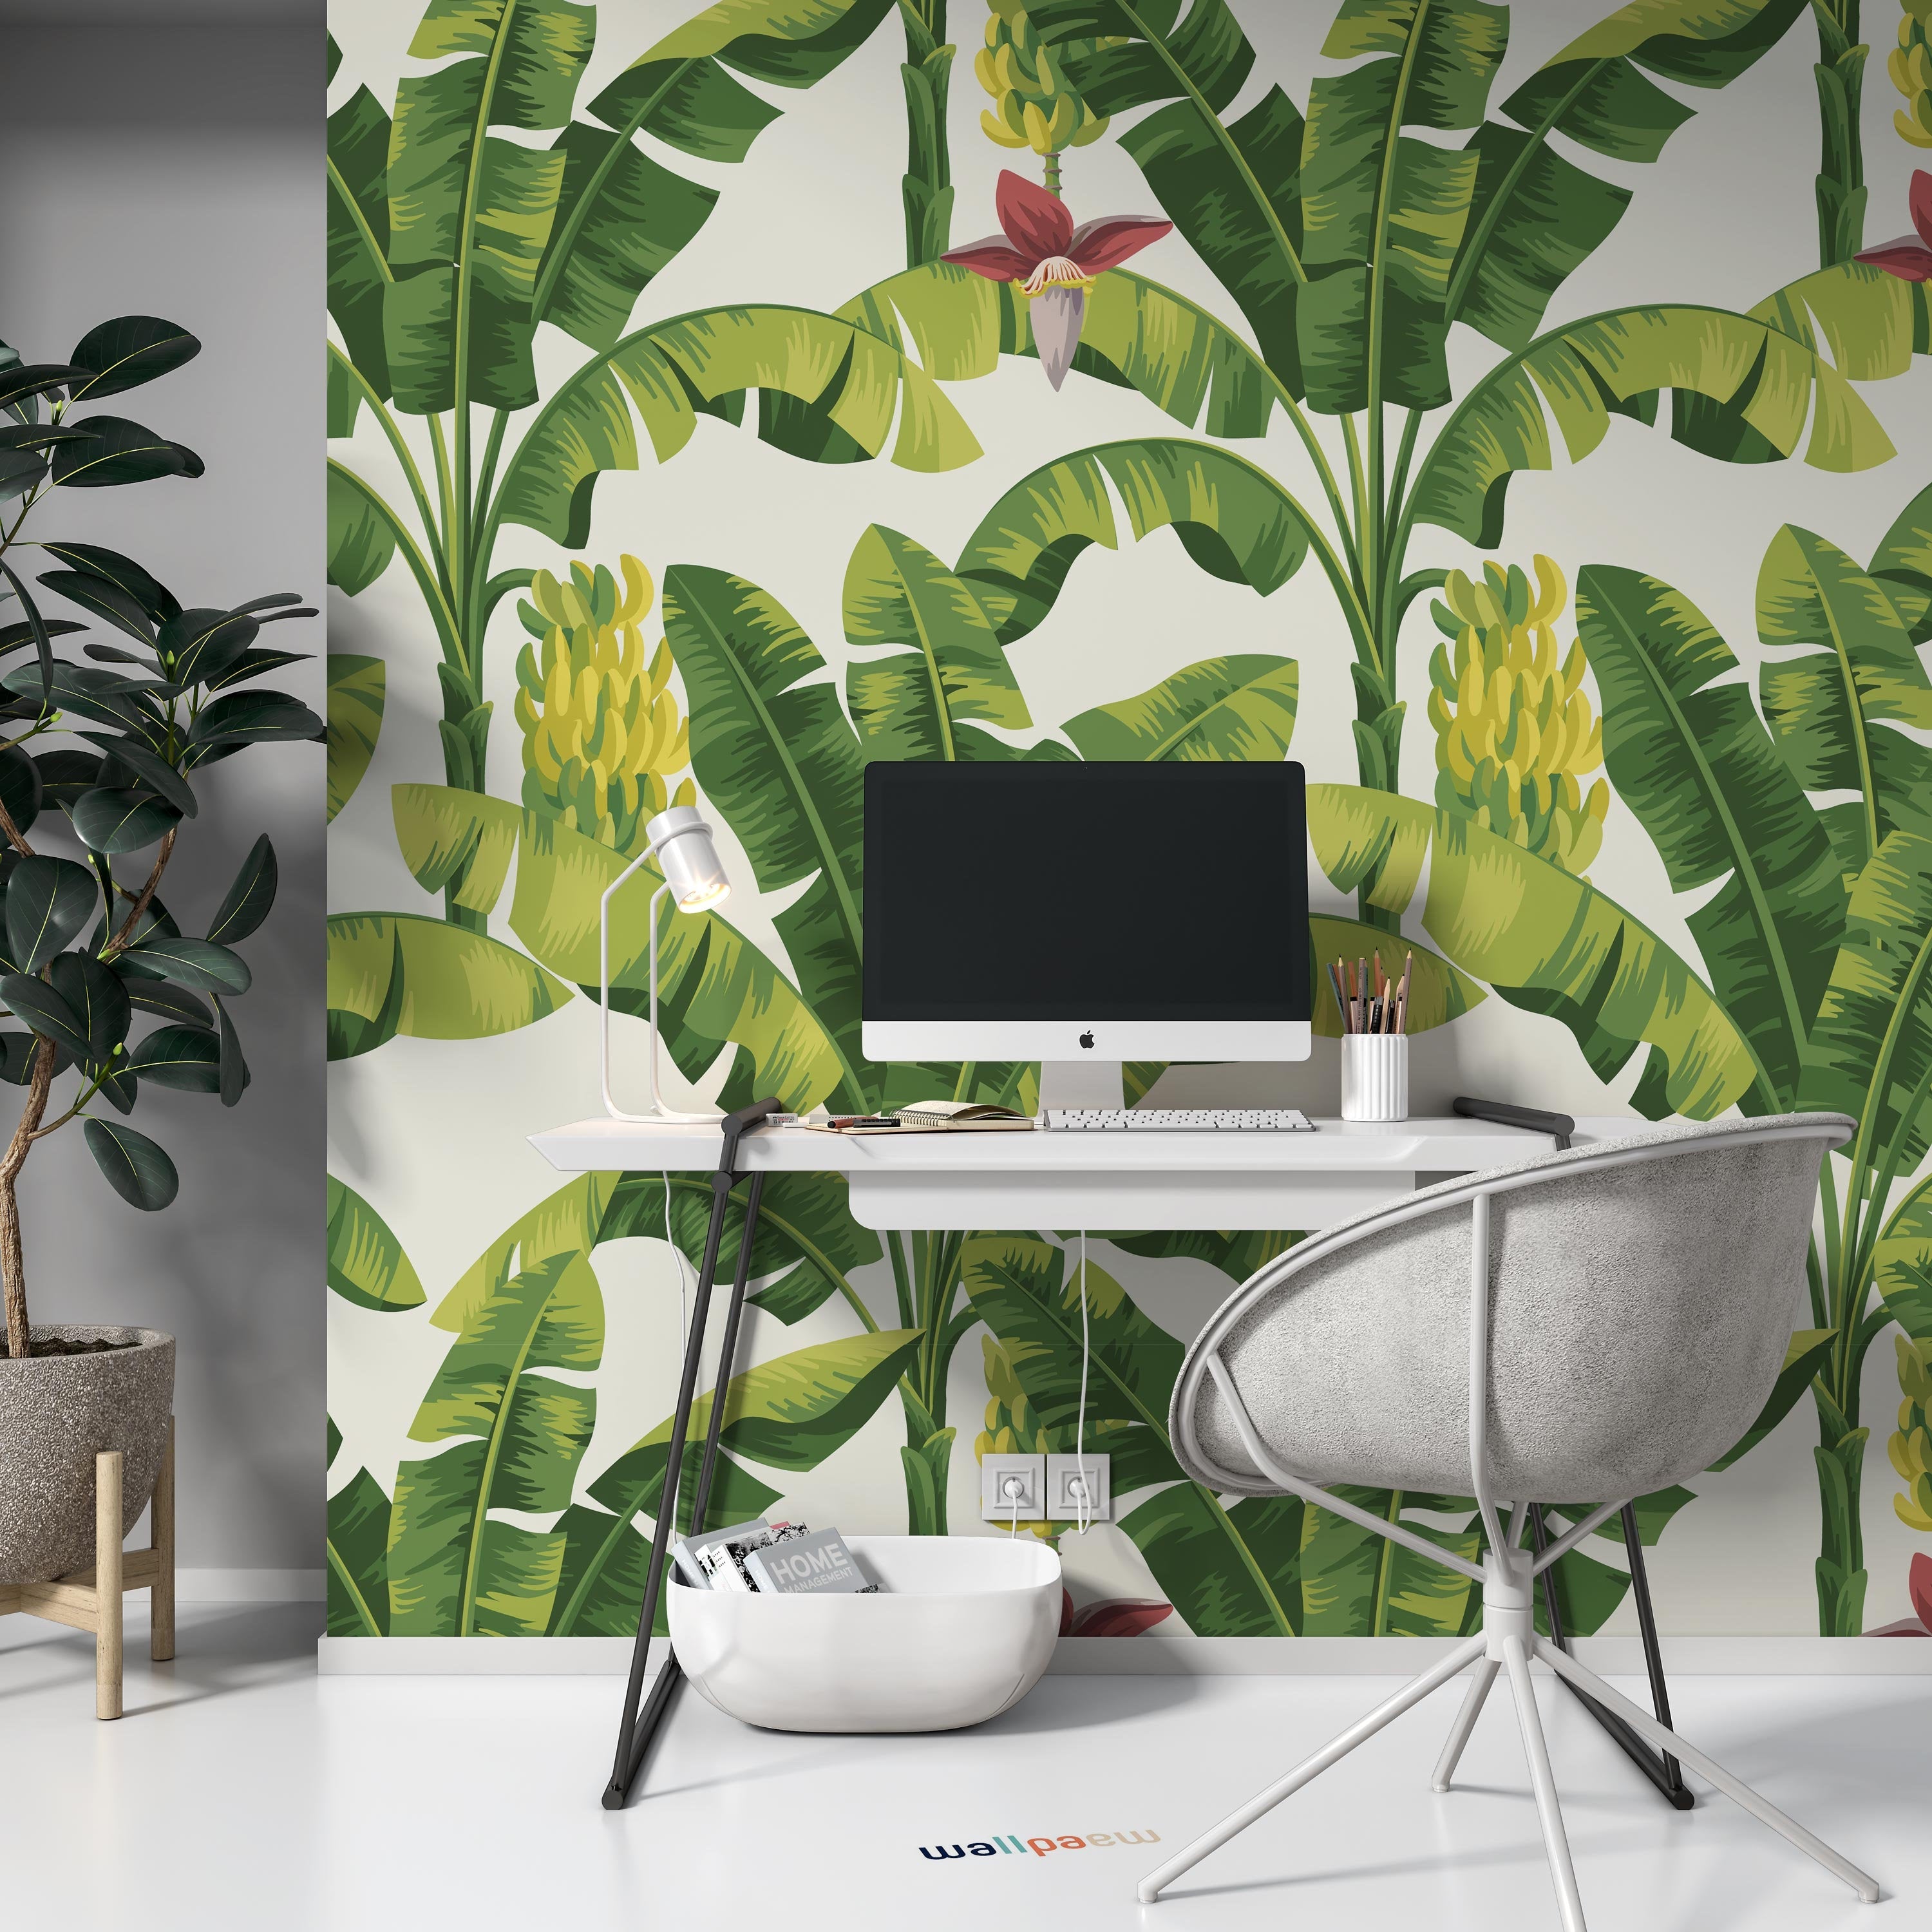 Tropical Banana Palm Leaves Plants Flowers Floral Background Wallpaper Restaurant Living Room Cafe Office Bedroom Mural Home Wall Art